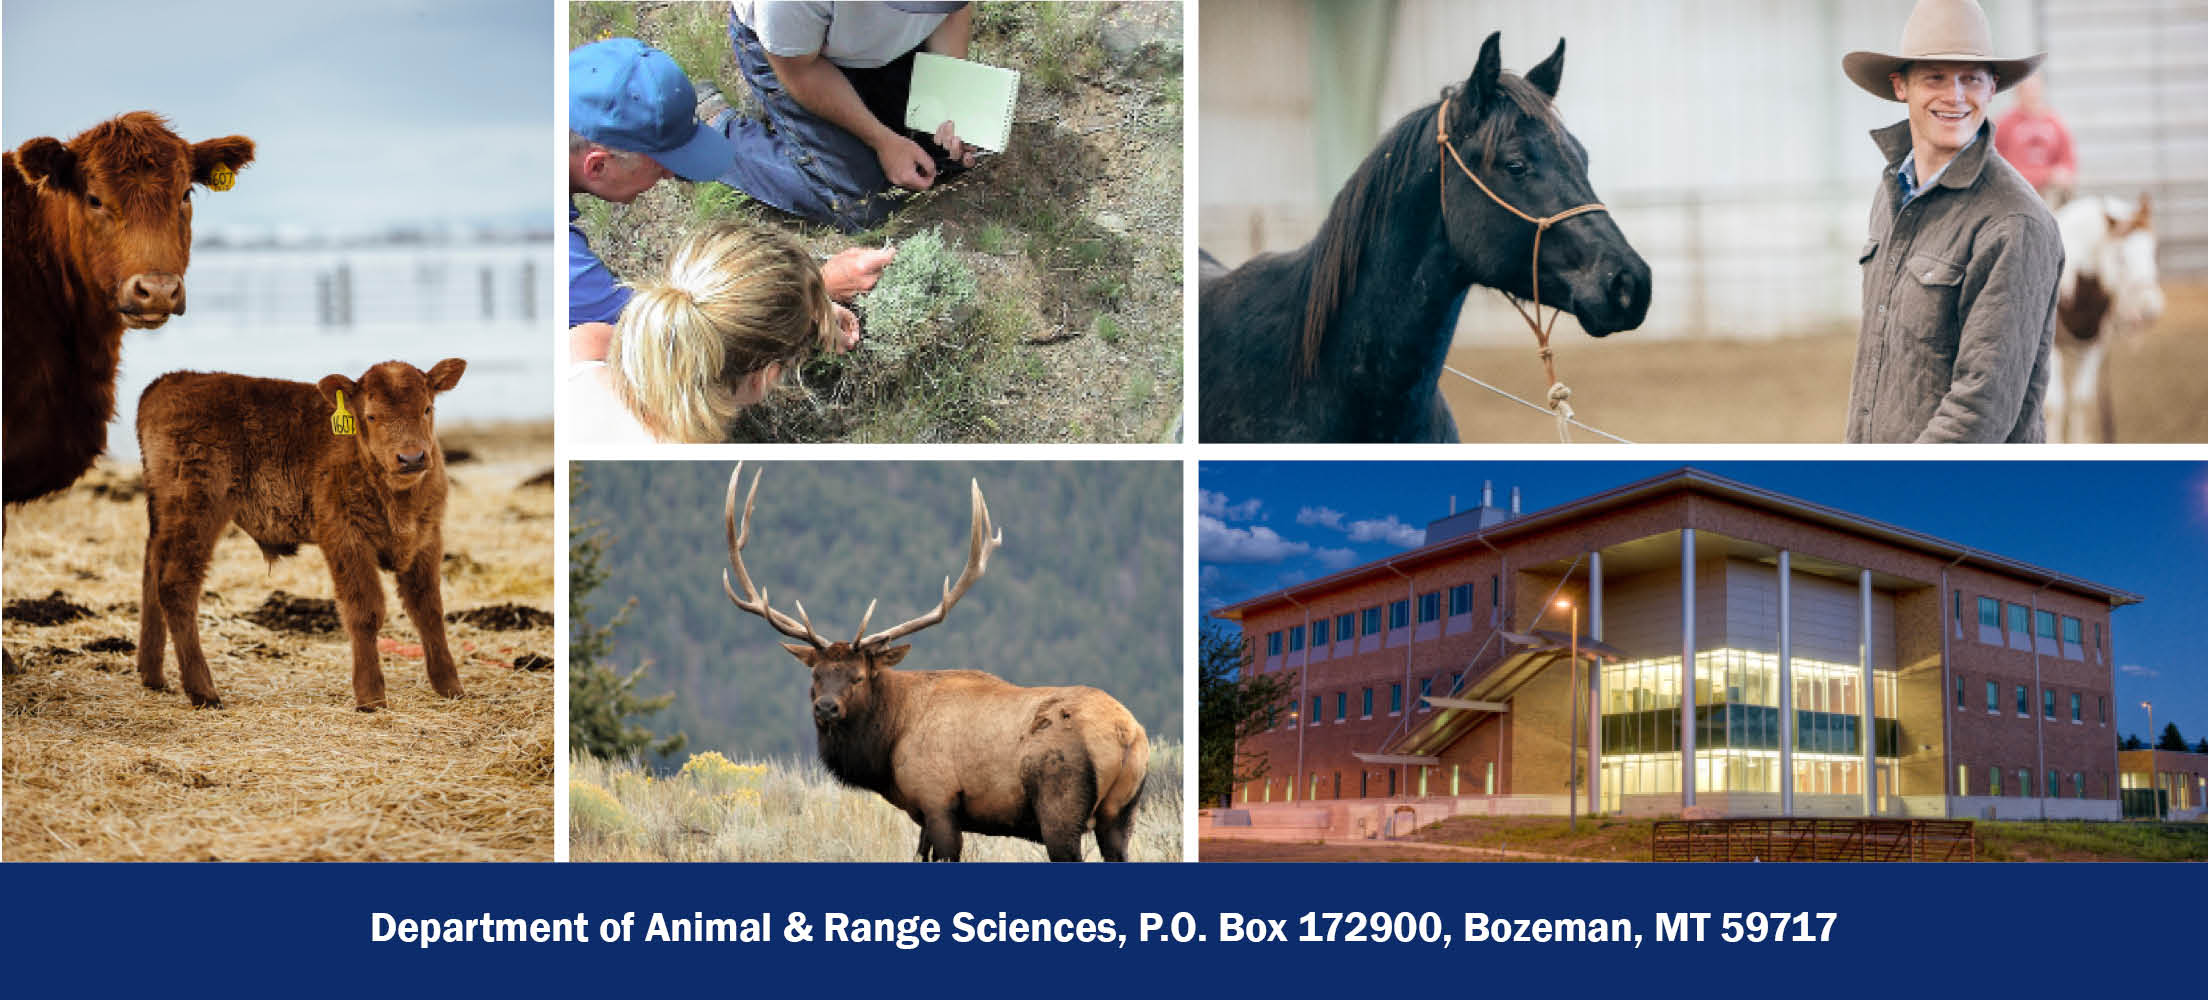 a cow and calf, a male student with horse, students studying grasses, an elk, photo of a three story building at night